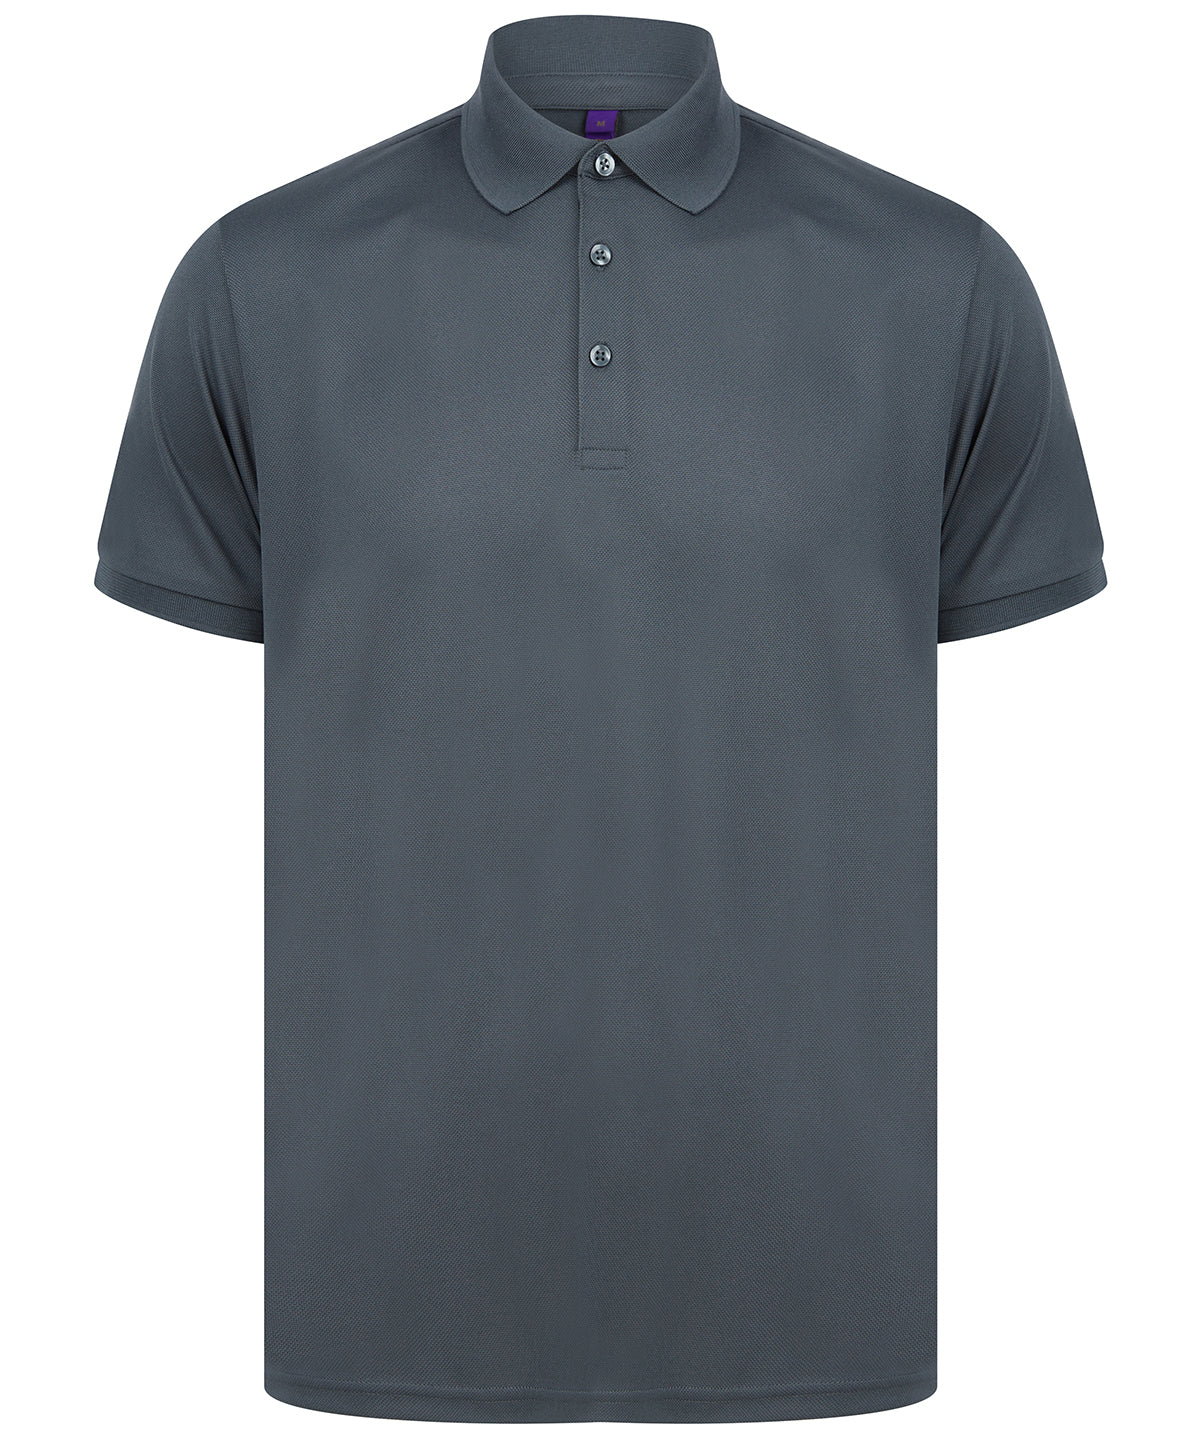 Personalised Polo Shirts - Black Henbury Recycled polyester polo shirt